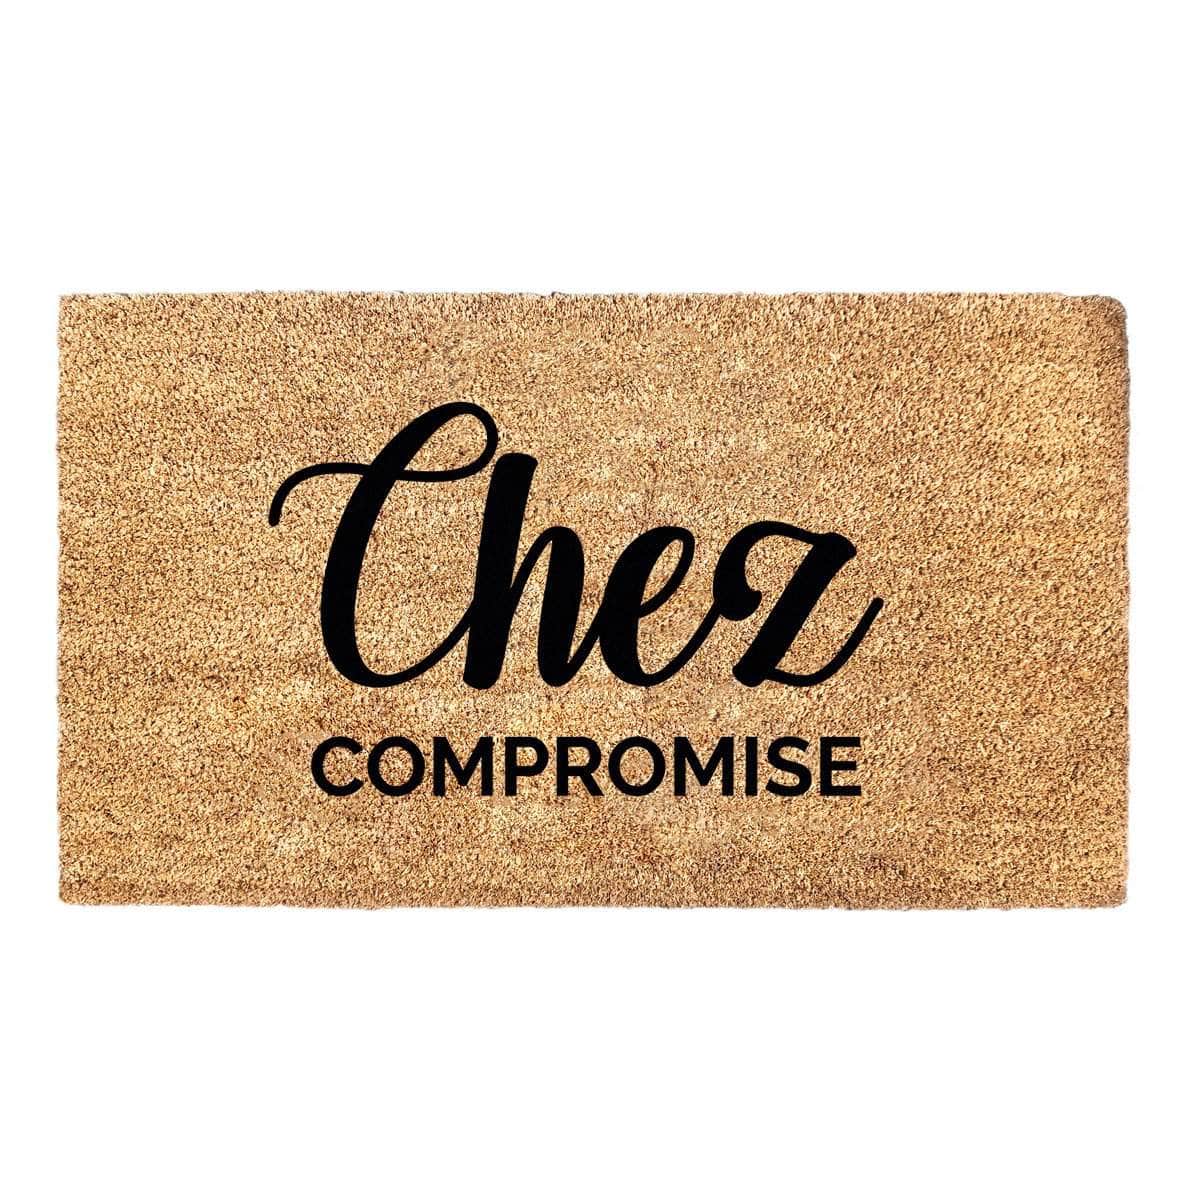 Personalized Chez "At The Home of" Doormat - Customized Doormat